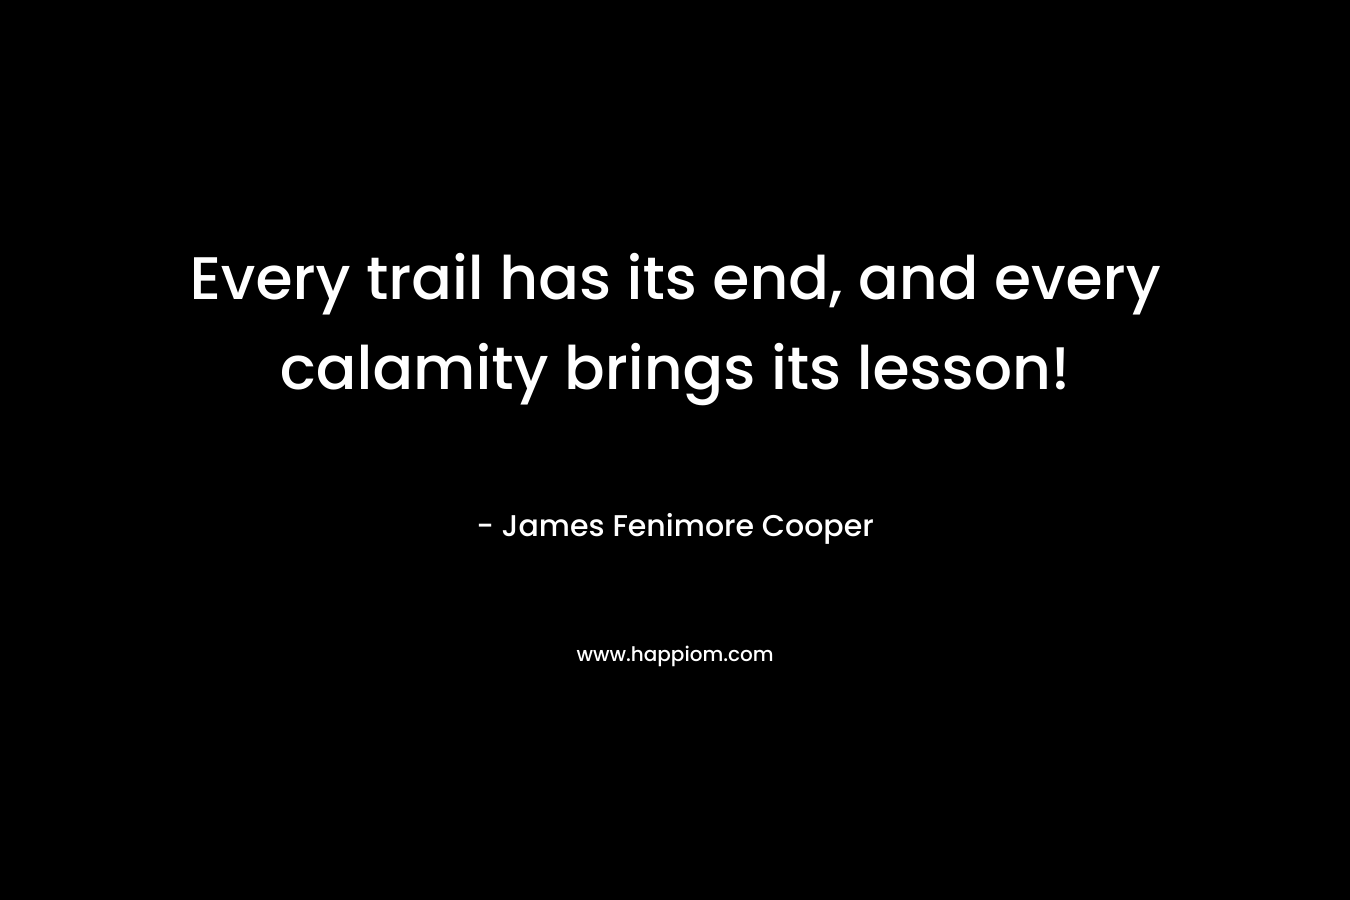 Every trail has its end, and every calamity brings its lesson! – James Fenimore Cooper